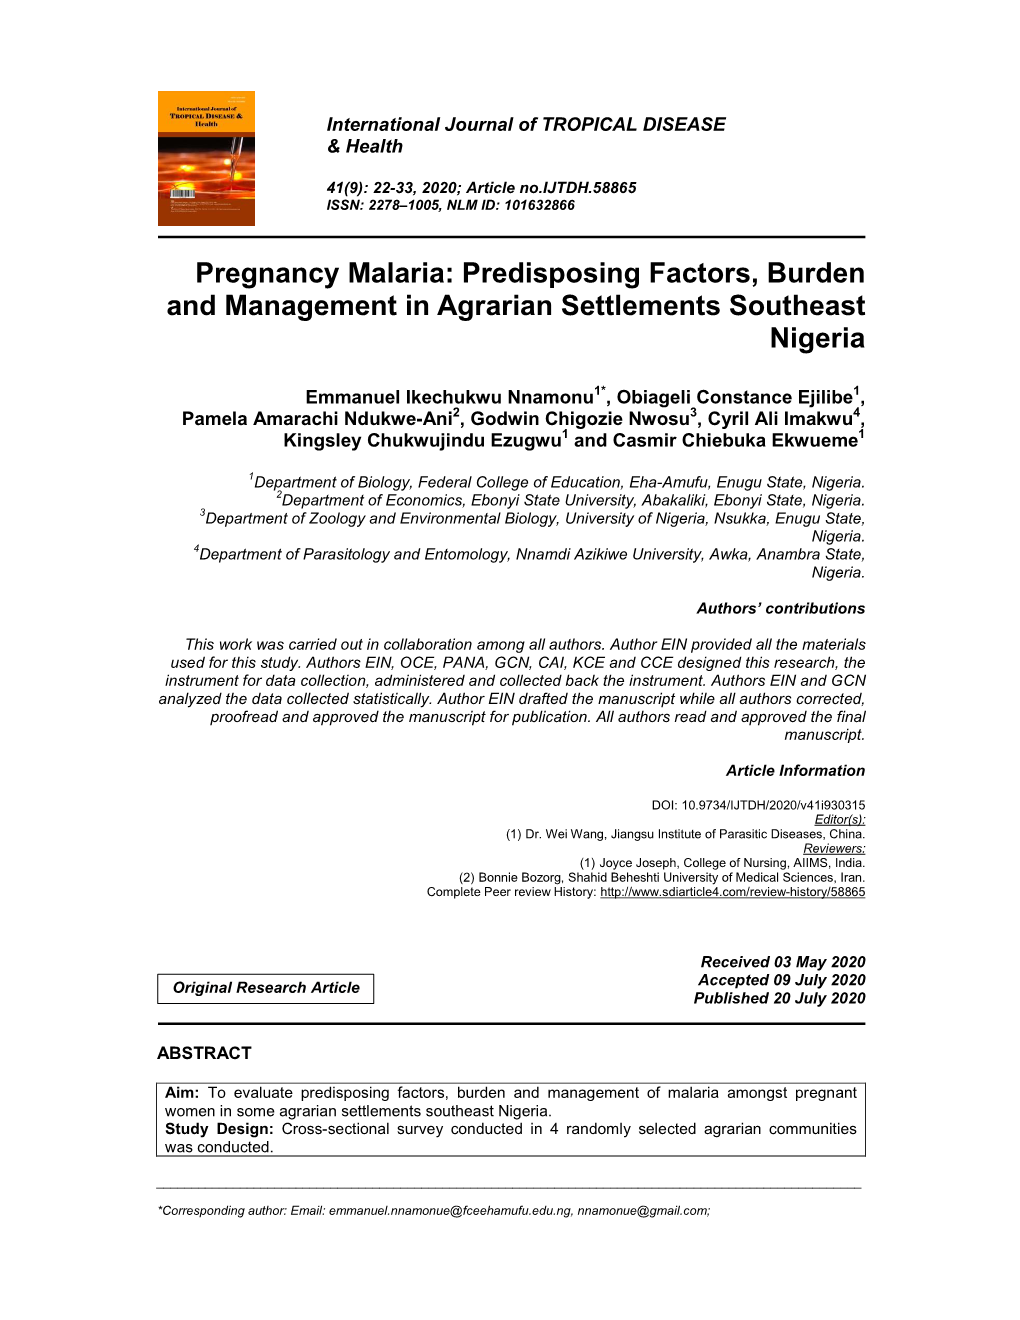 Predisposing Factors, Burden and Management in Agrarian Settlements Southeast Nigeria